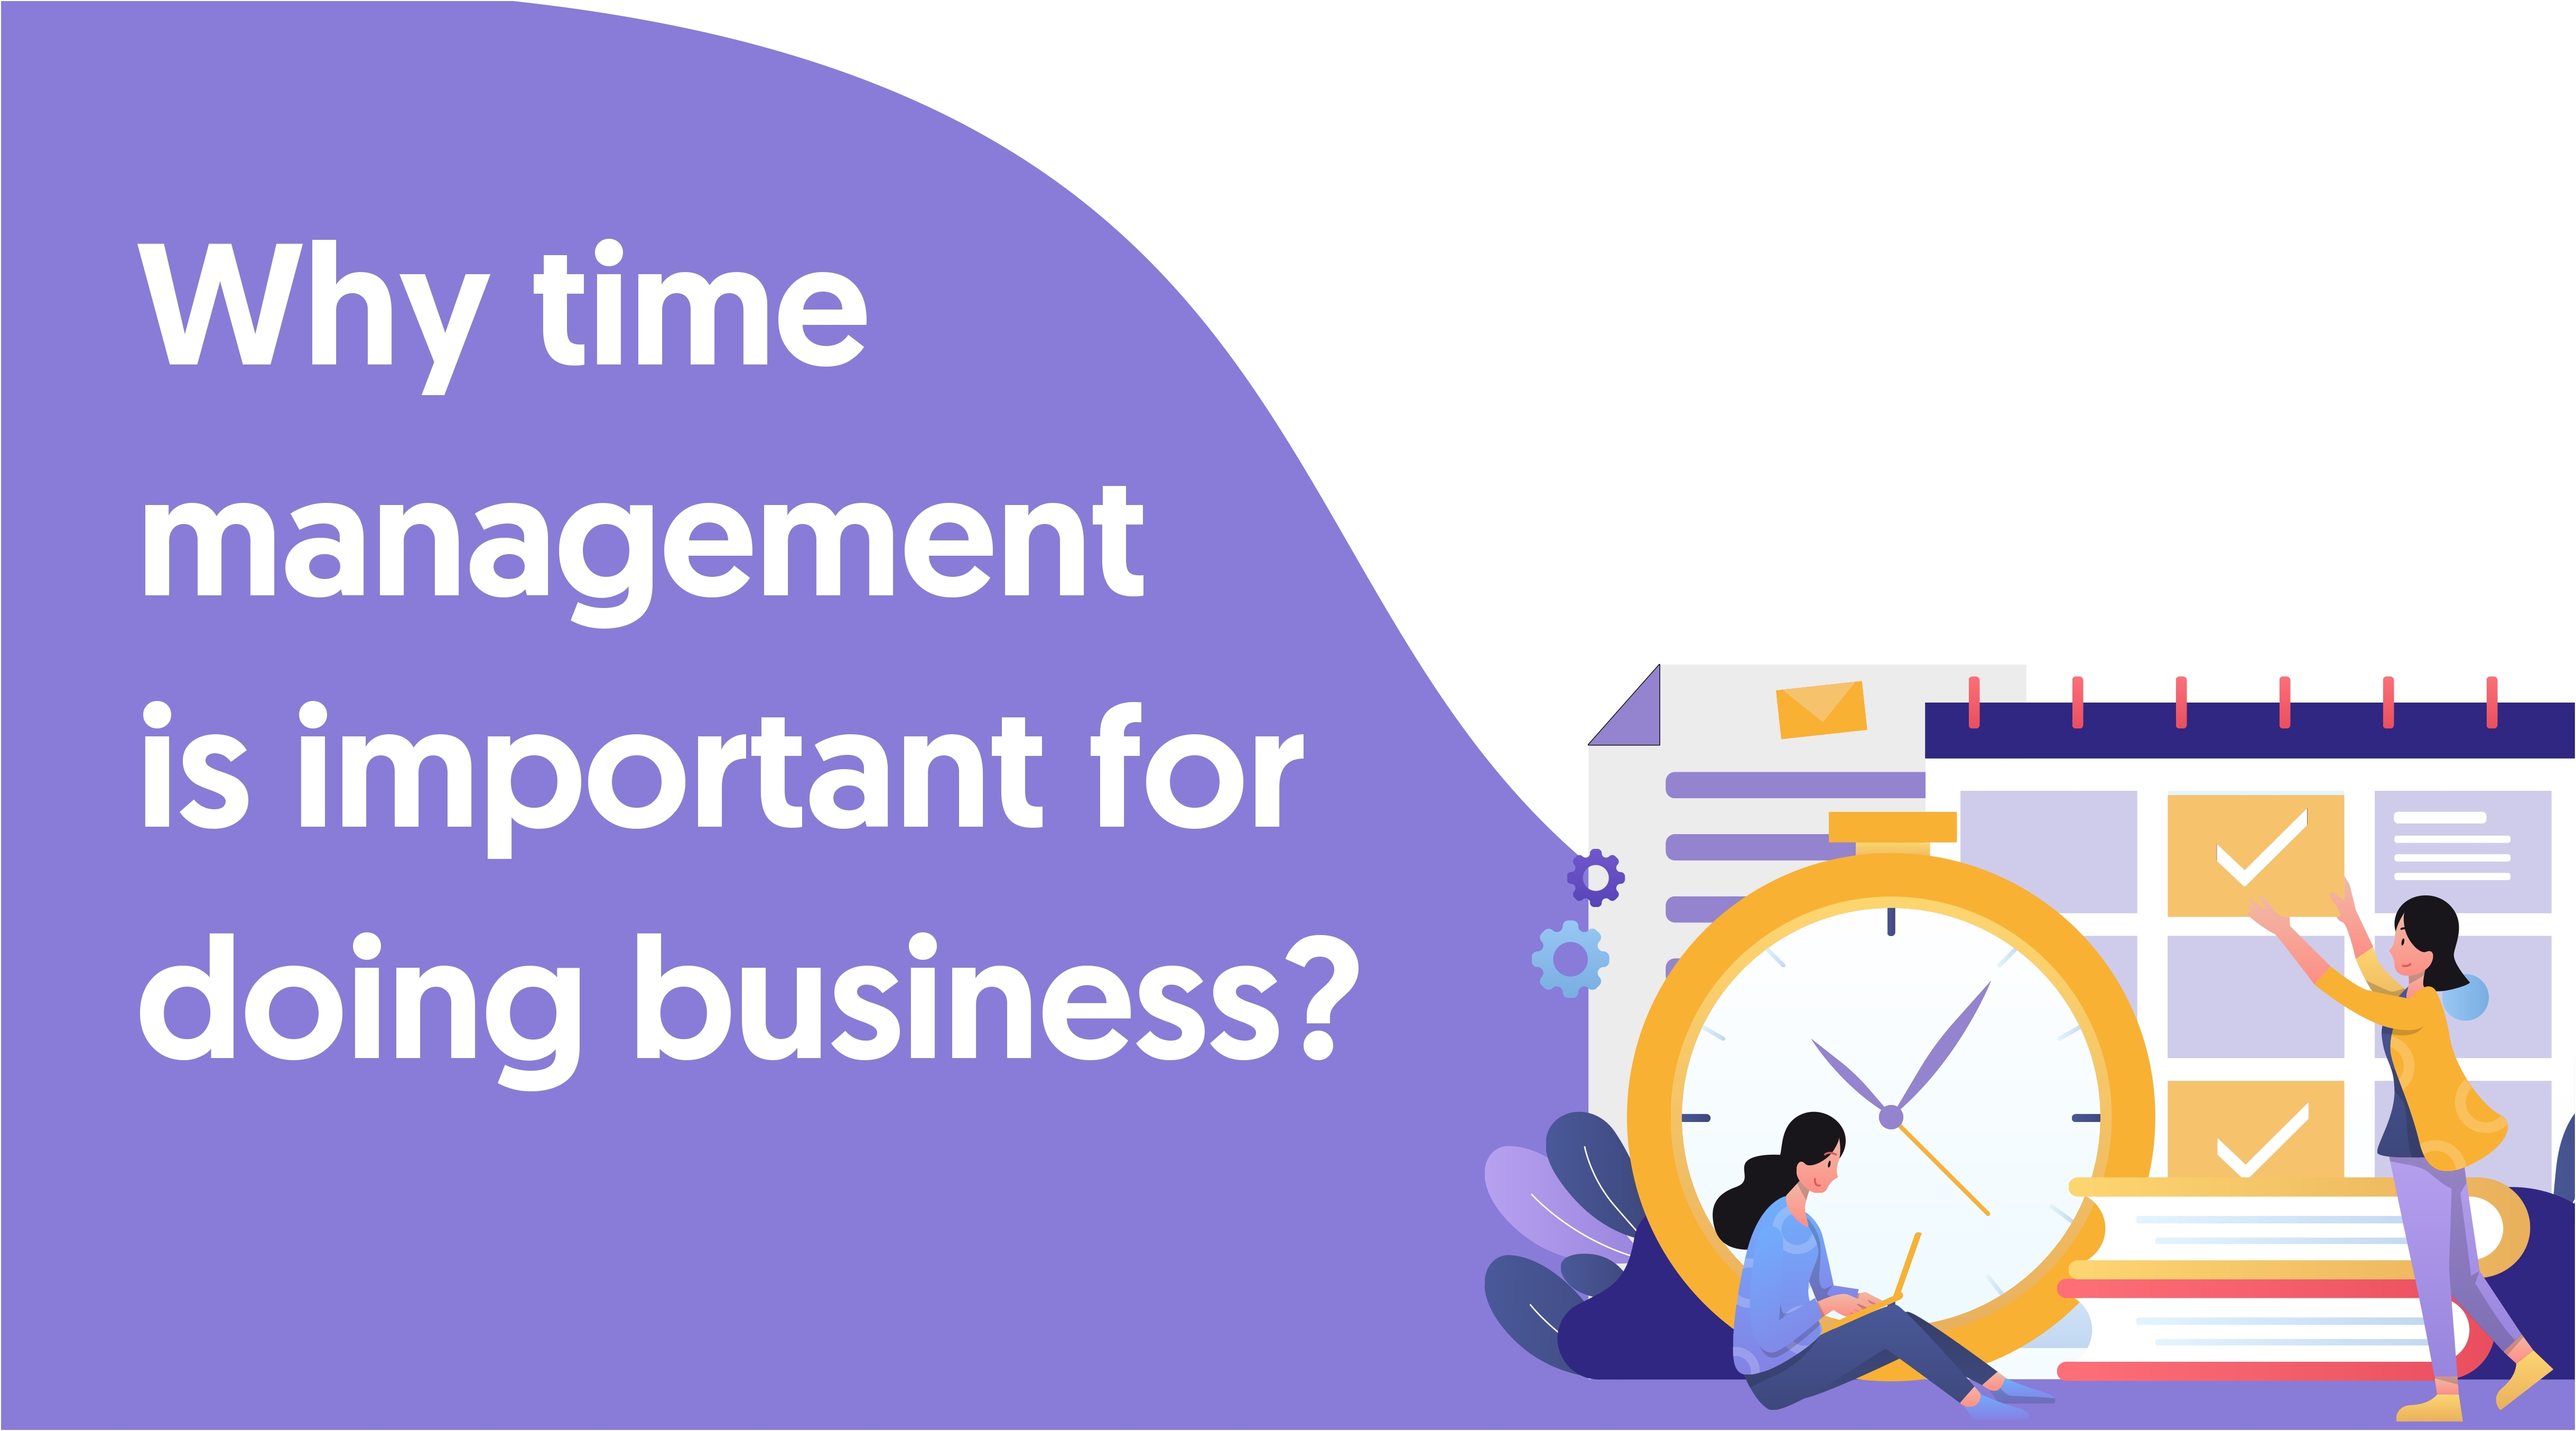 Why time management is important for doing business